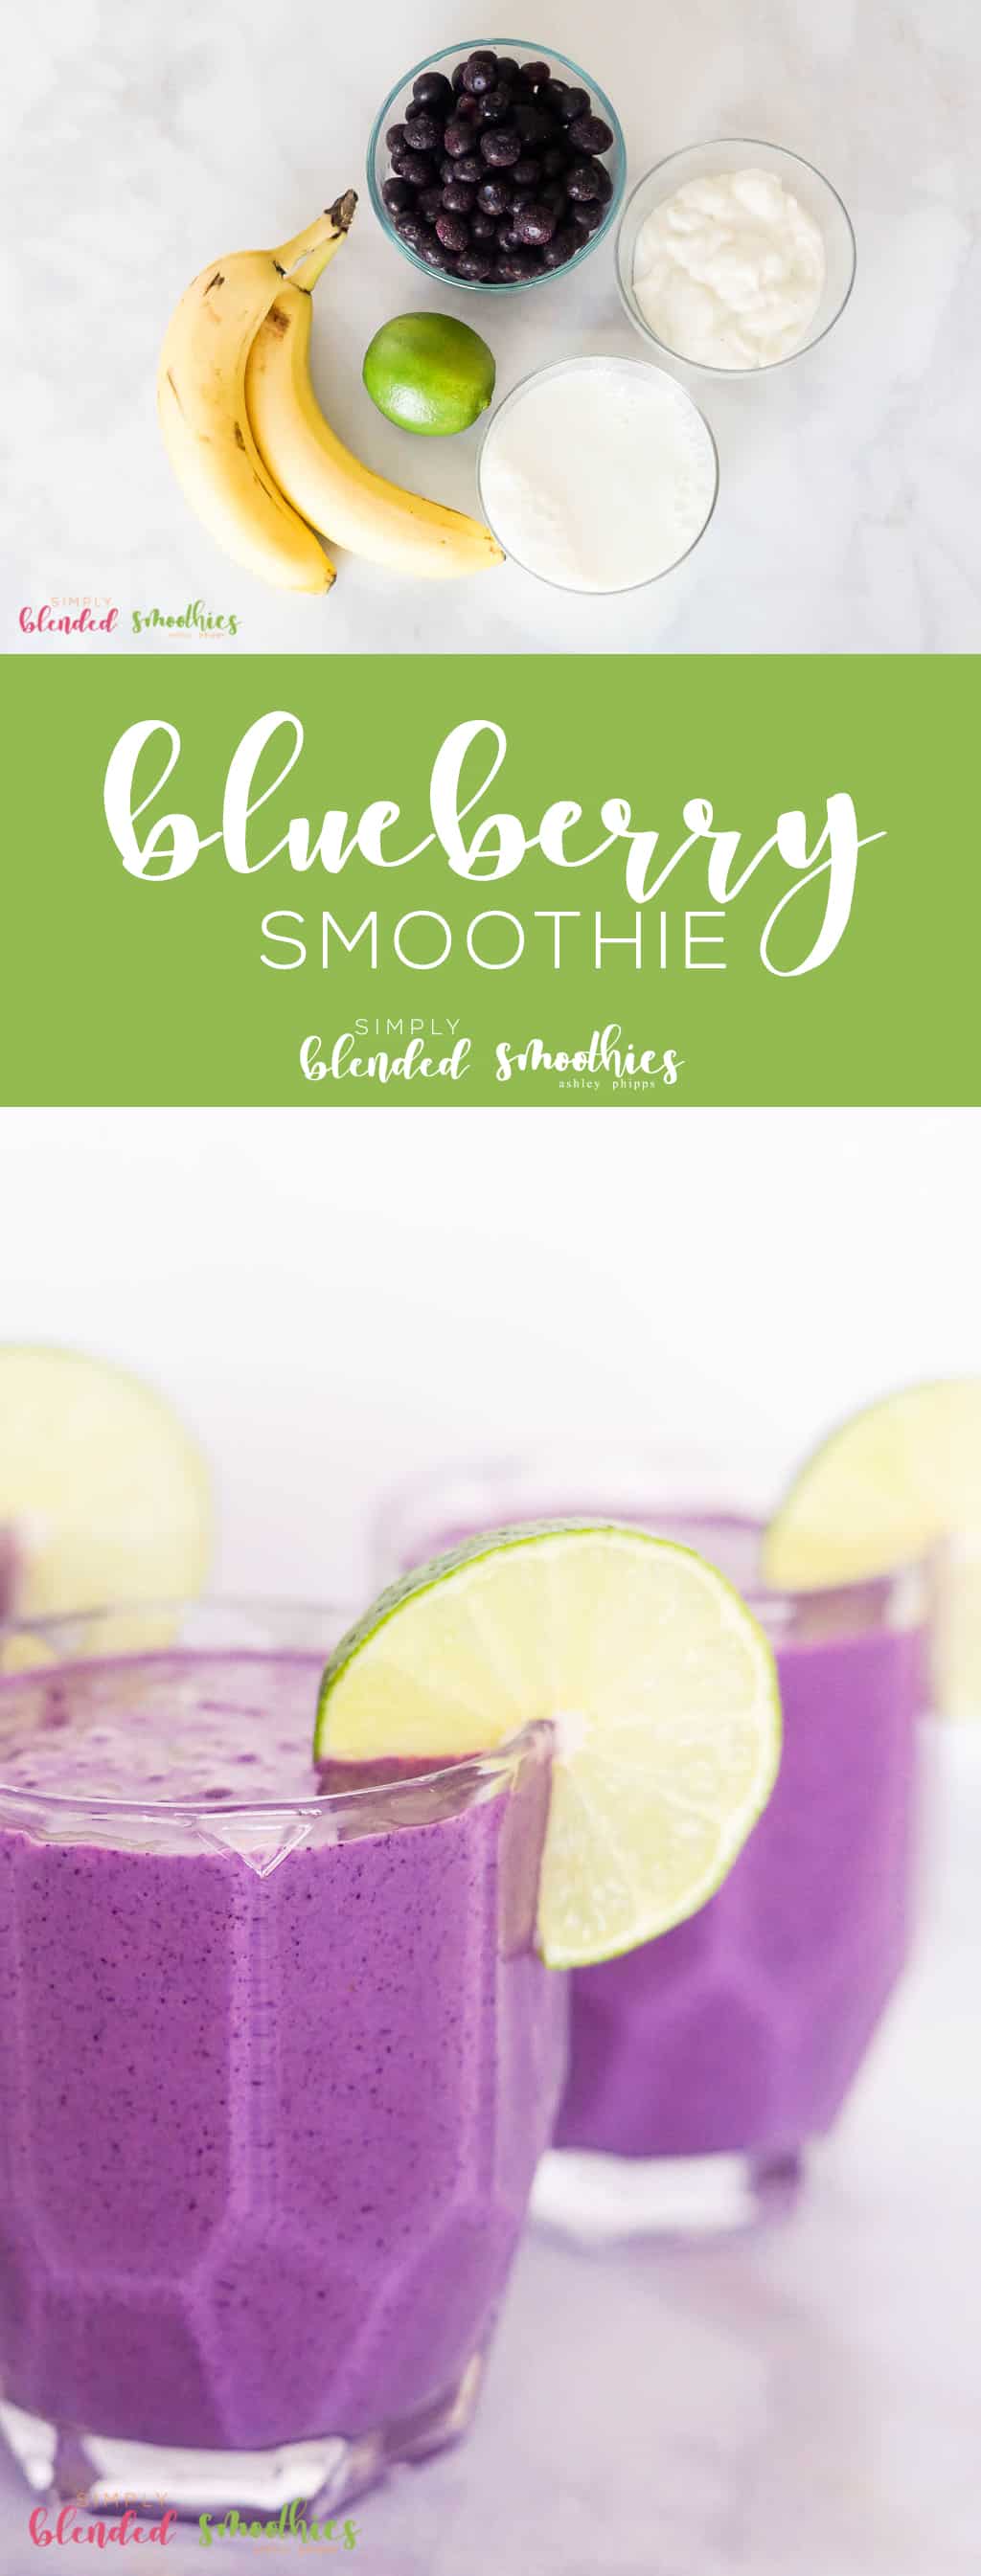 This Healthy Blueberry Smoothie Is Full Of So Much Flavor Will Keep You Full All Morning And It Is Full Of Antioxidants Vitamins And Minerals Too